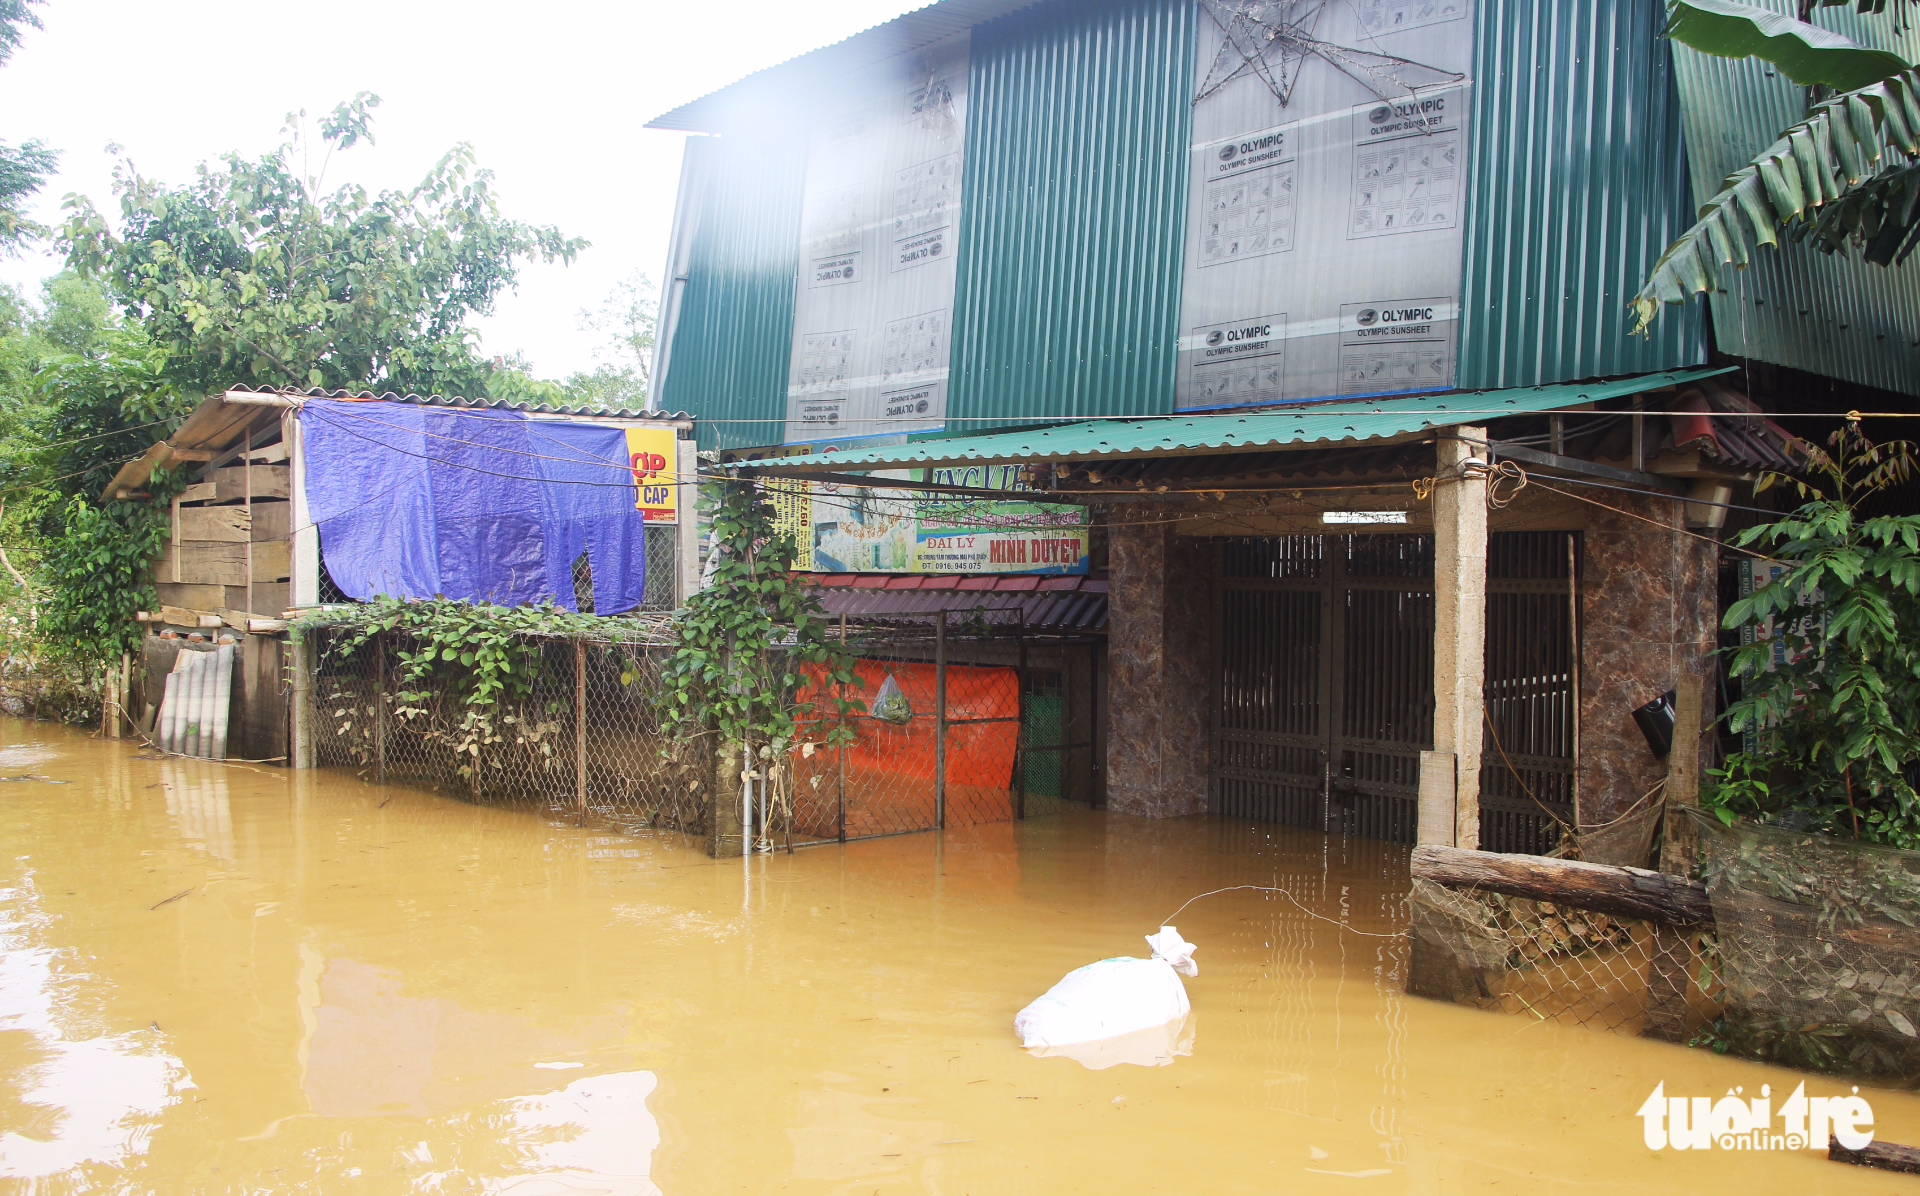 A house in Huong Son District, Ha Tinh Province, is isolated by floodwater.